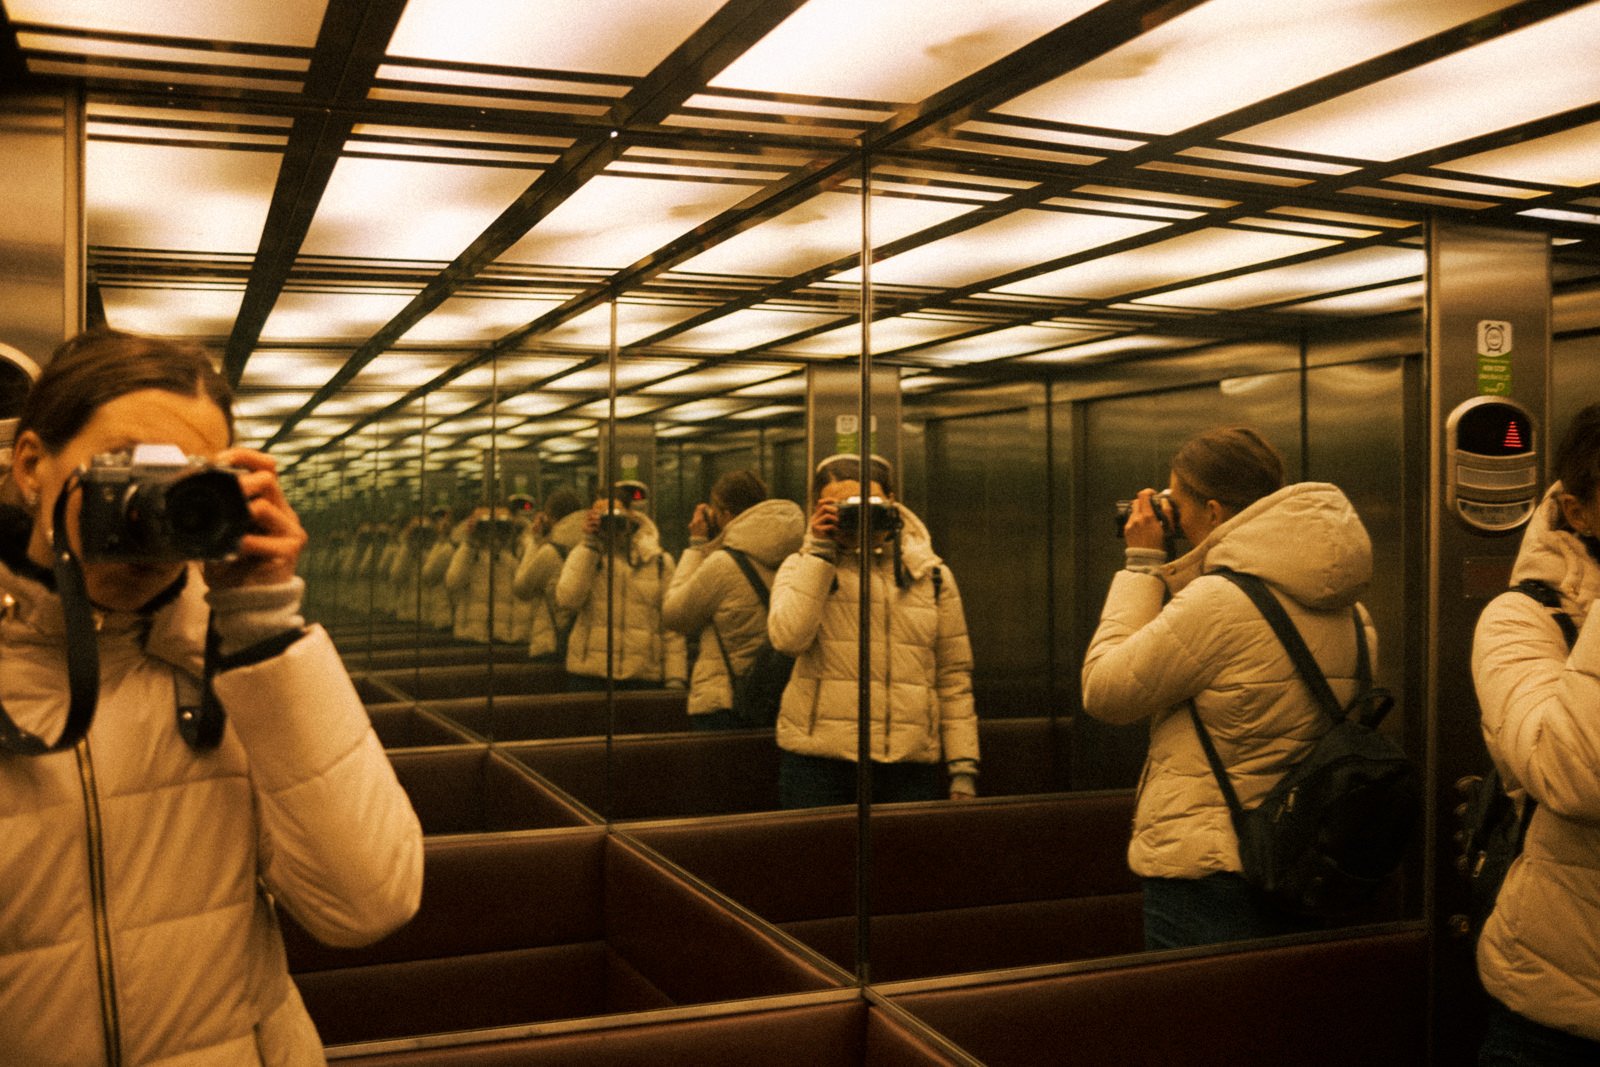 A woman photographer in a lift capturing her reflection